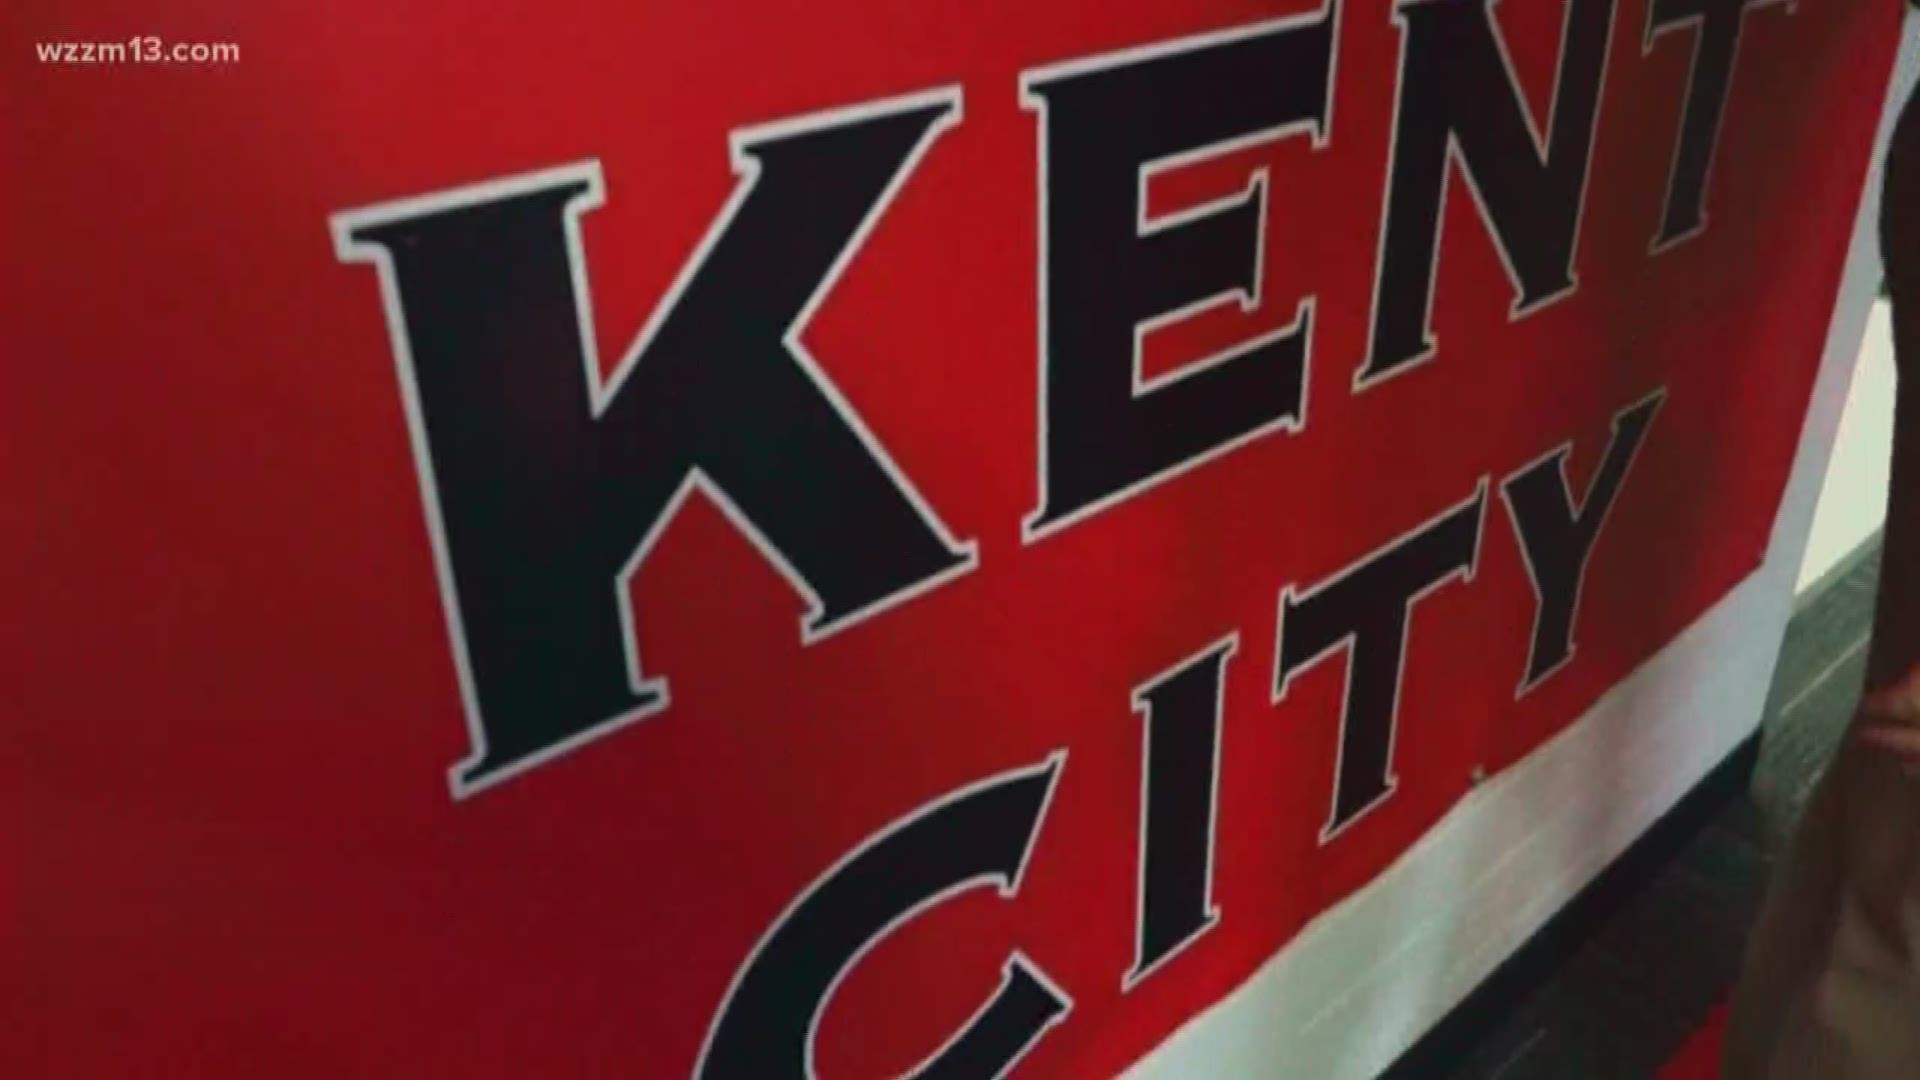 Kent City volleyball team helping charities